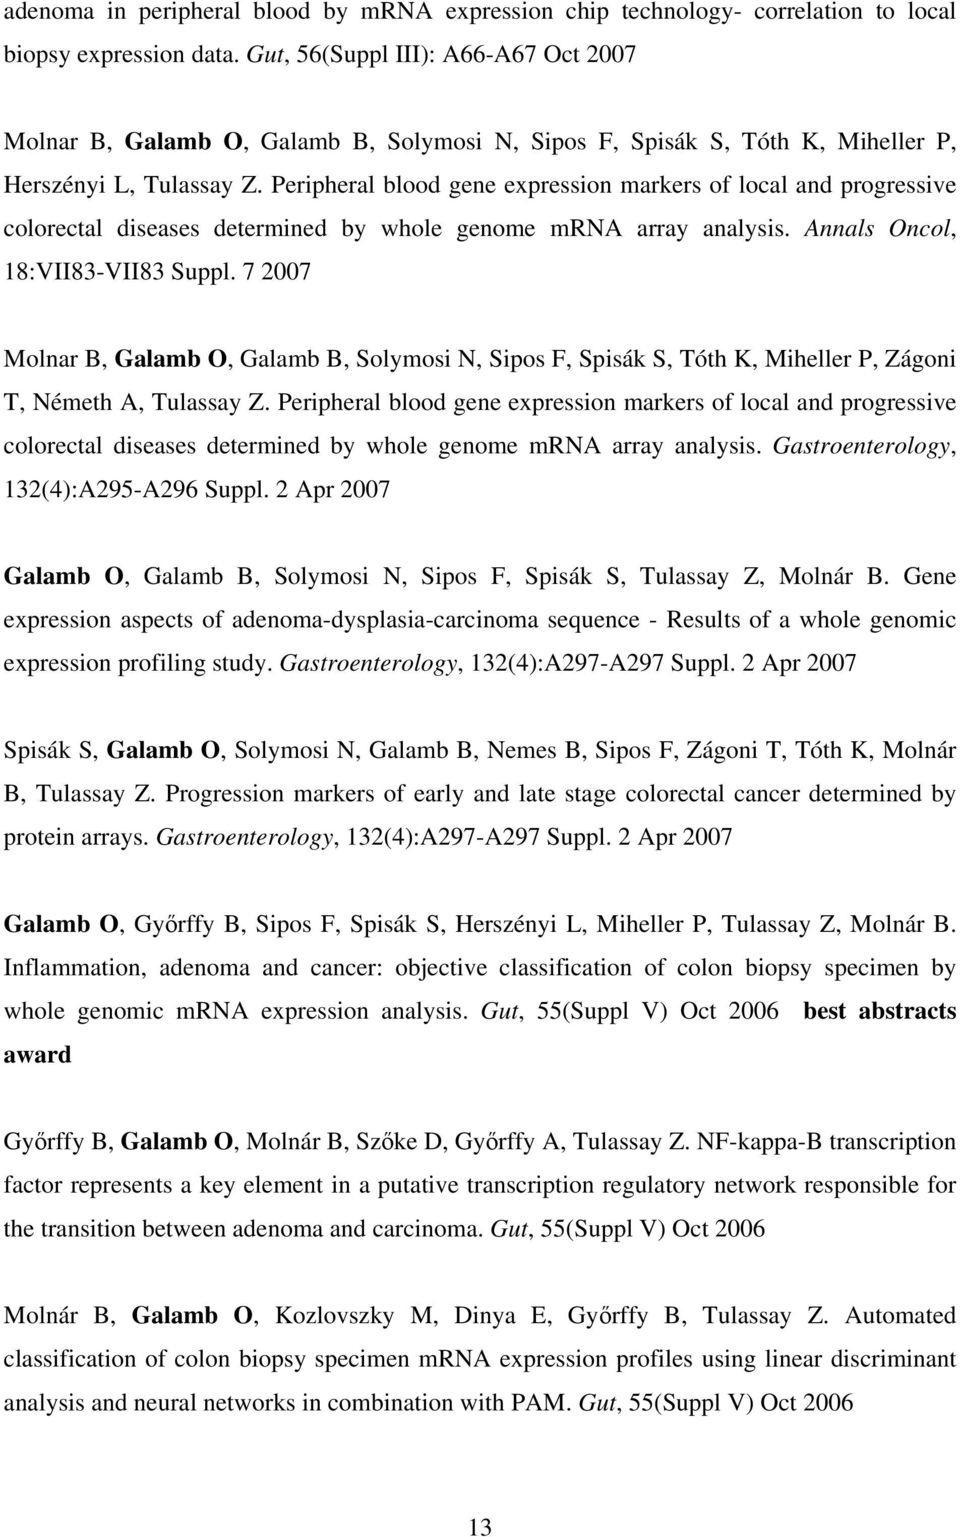 Peripheral blood gene expression markers of local and progressive colorectal diseases determined by whole genome mrna array analysis. Annals Oncol, 18:VII83-VII83 Suppl.